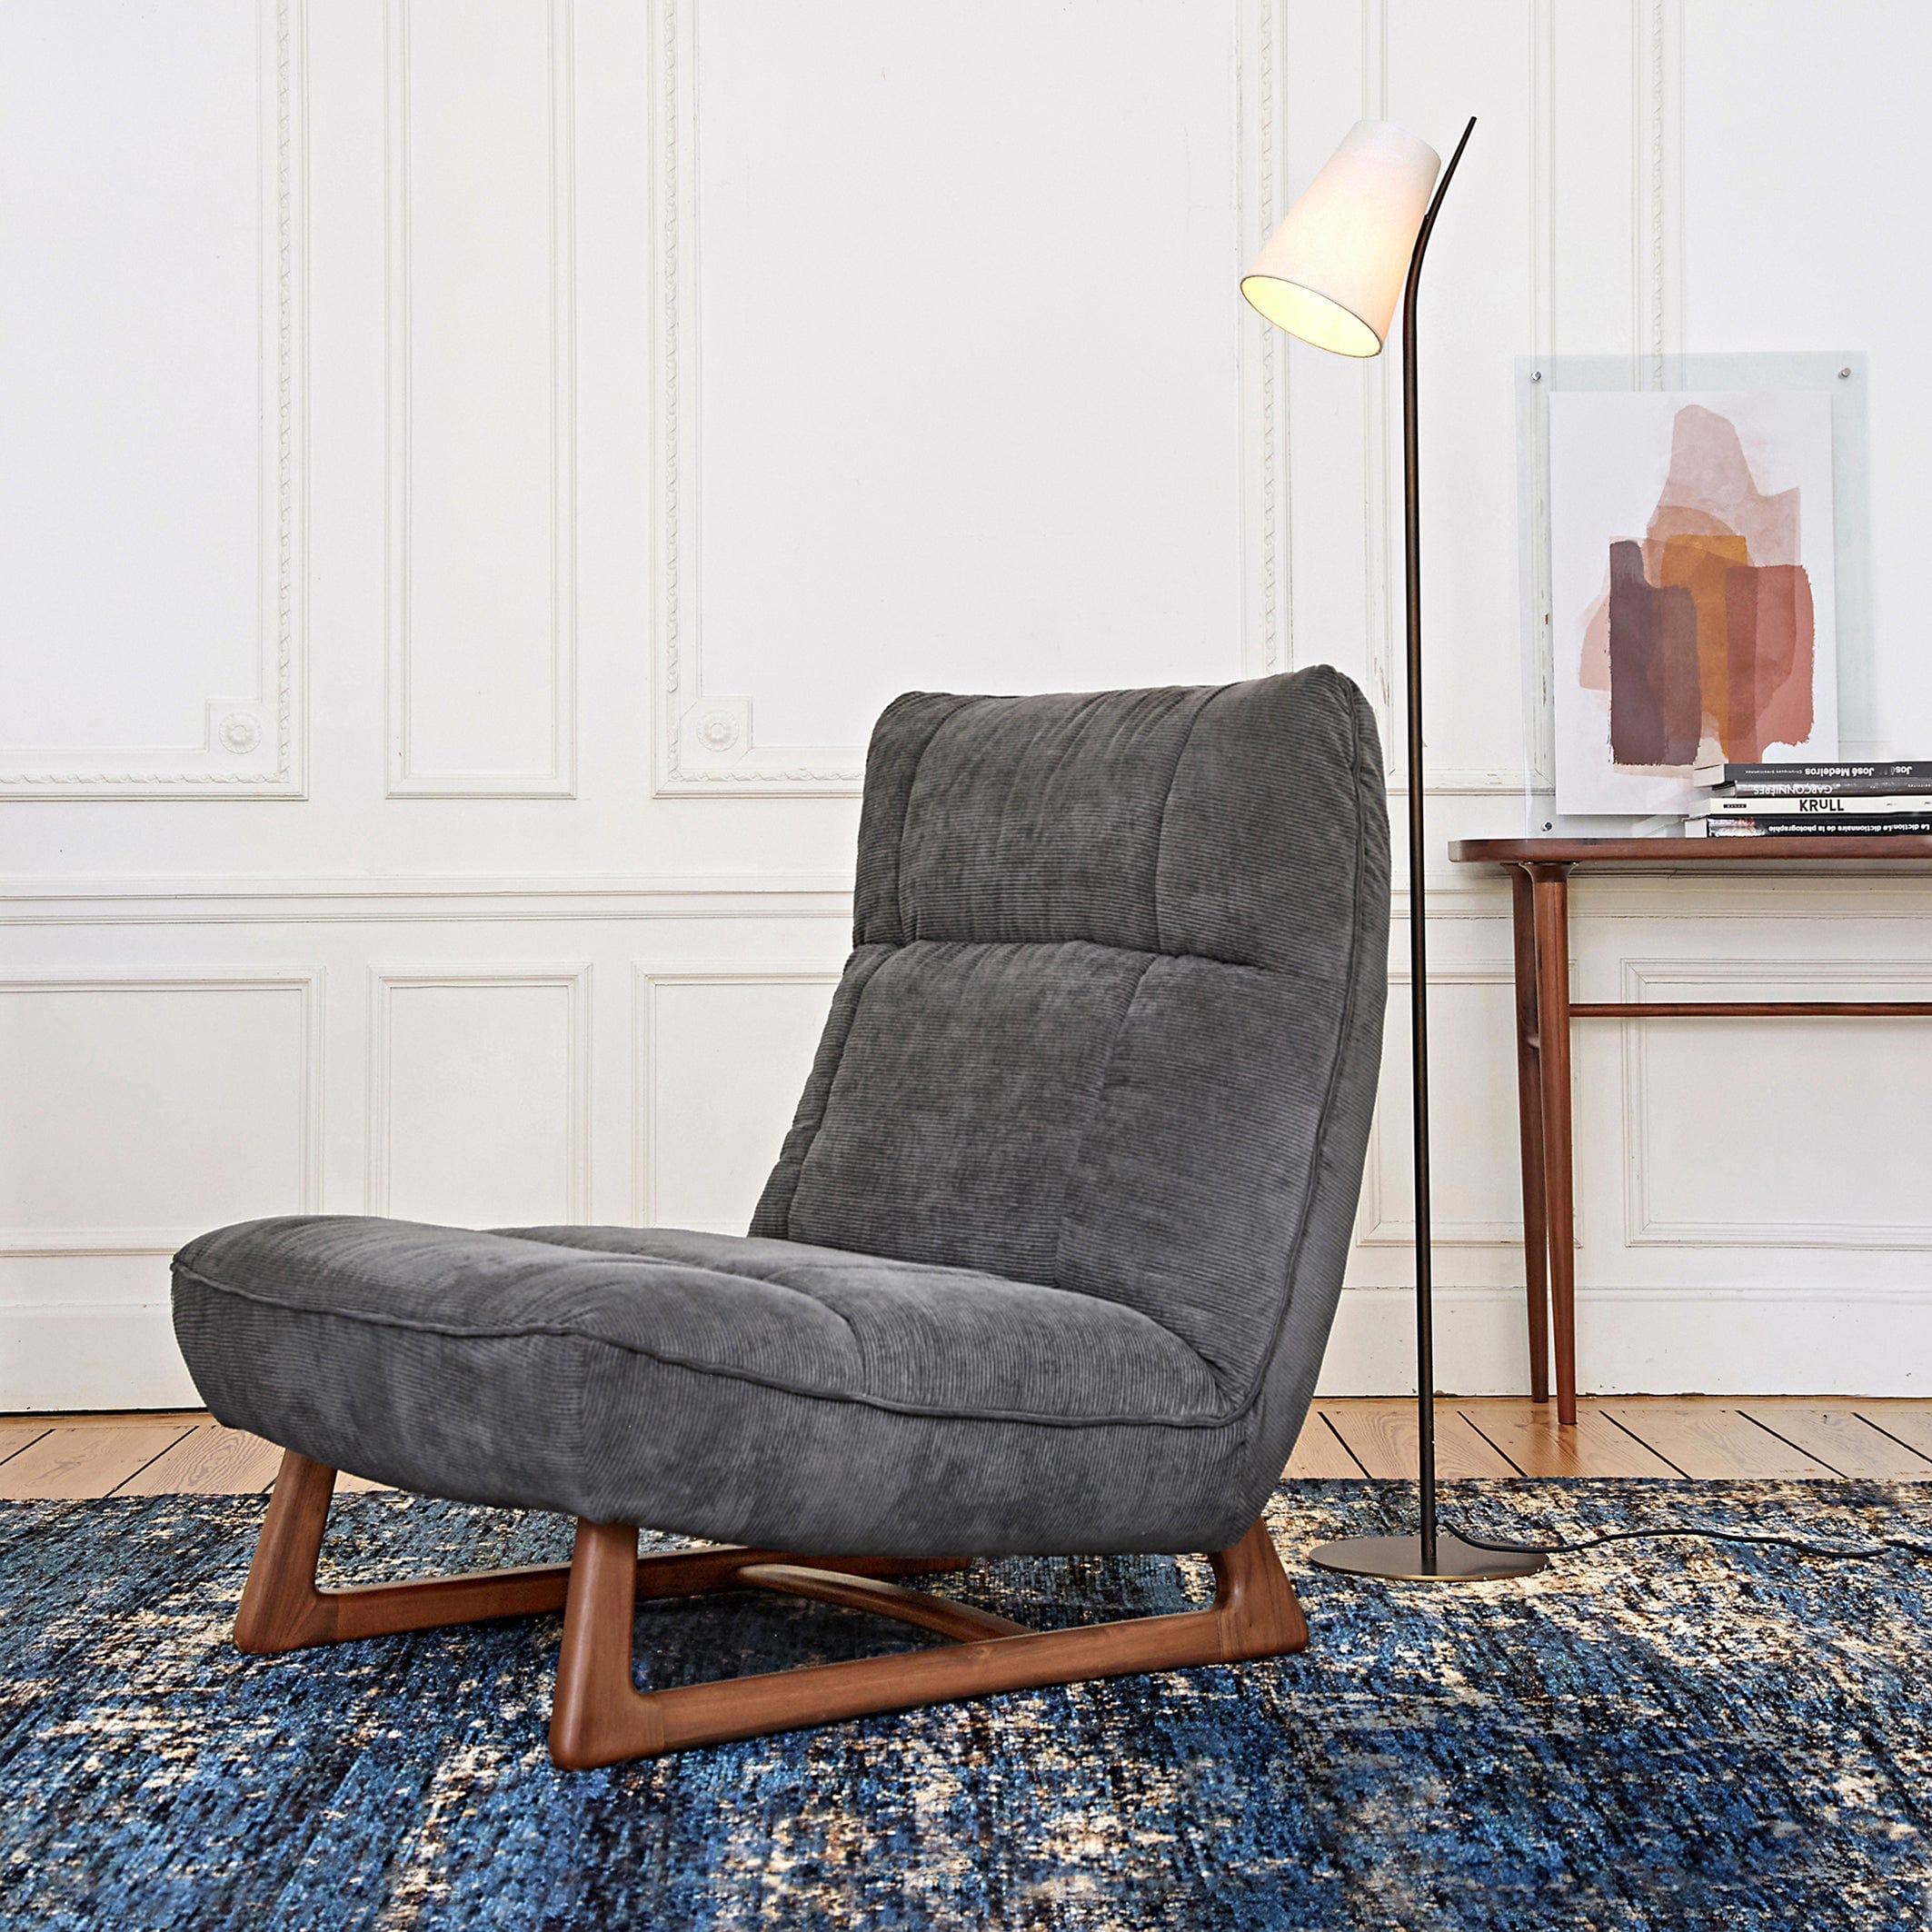 FAUTEUIL_GGS207_Gris anthracite-min.jpg